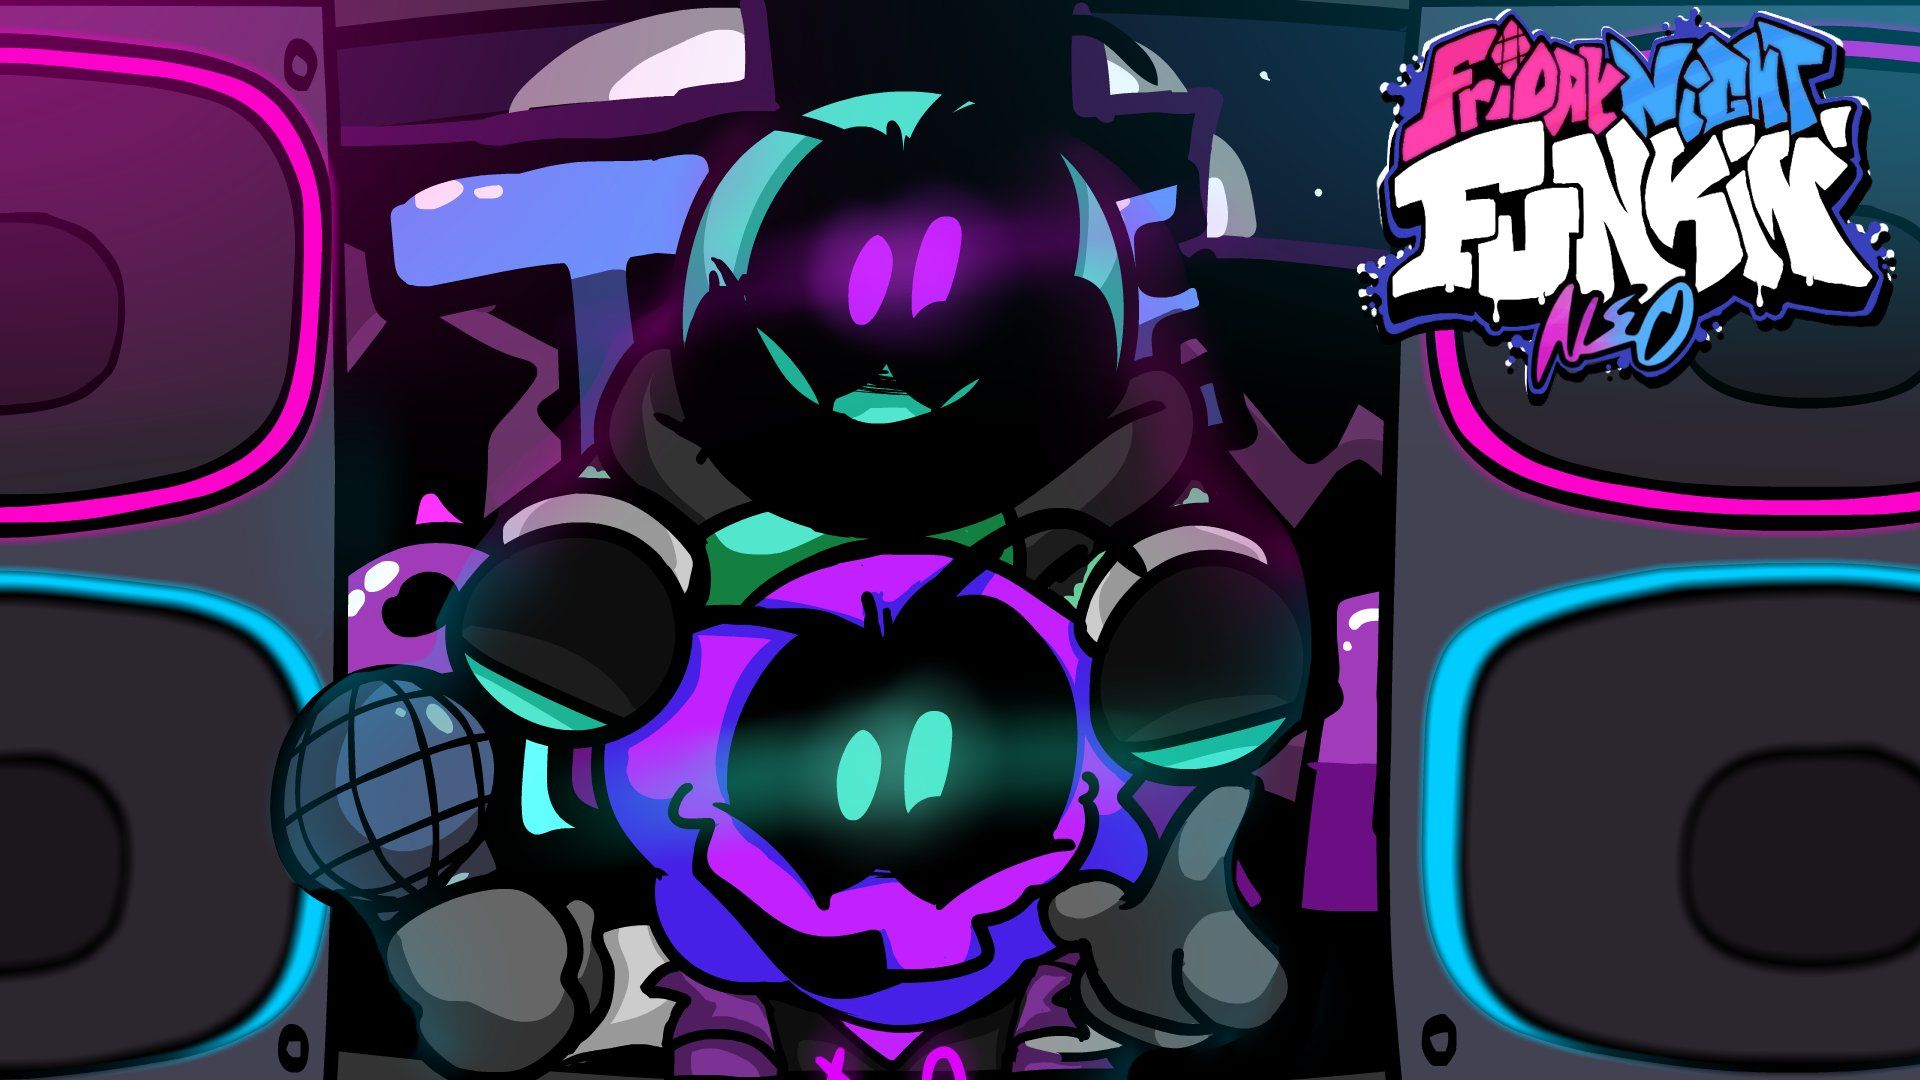 Friday Night Funkin' Neo's some promo art Made by Moisty featuring the Spooky kids and their new outfits!